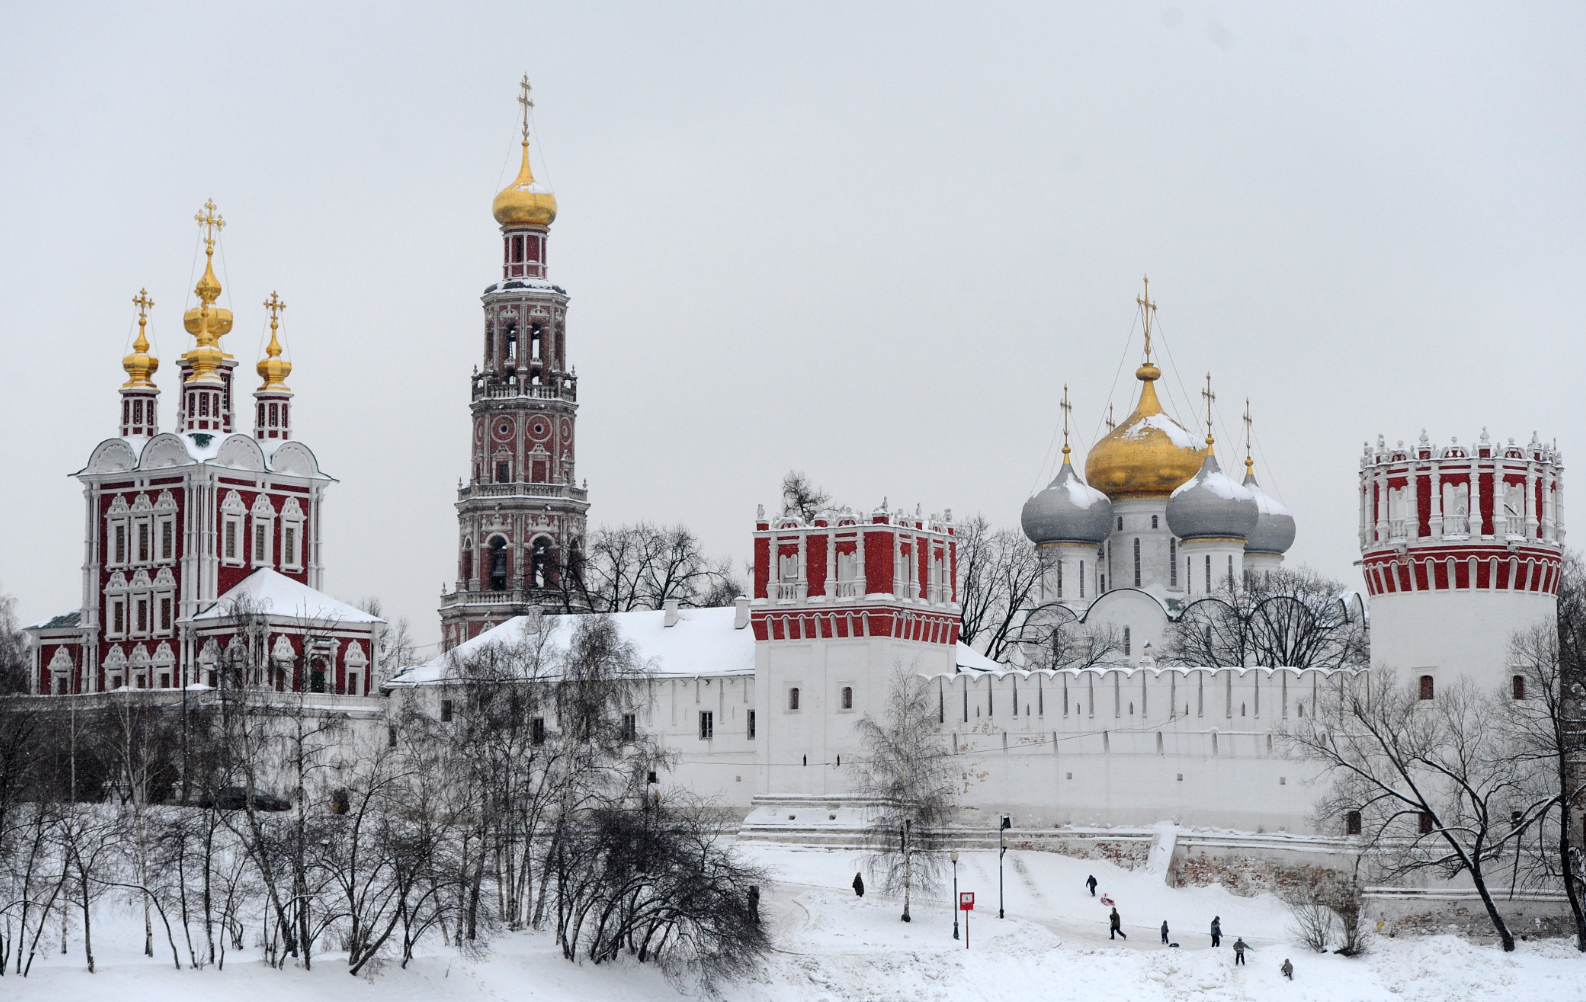 Novodevichy Convent in Moscow.